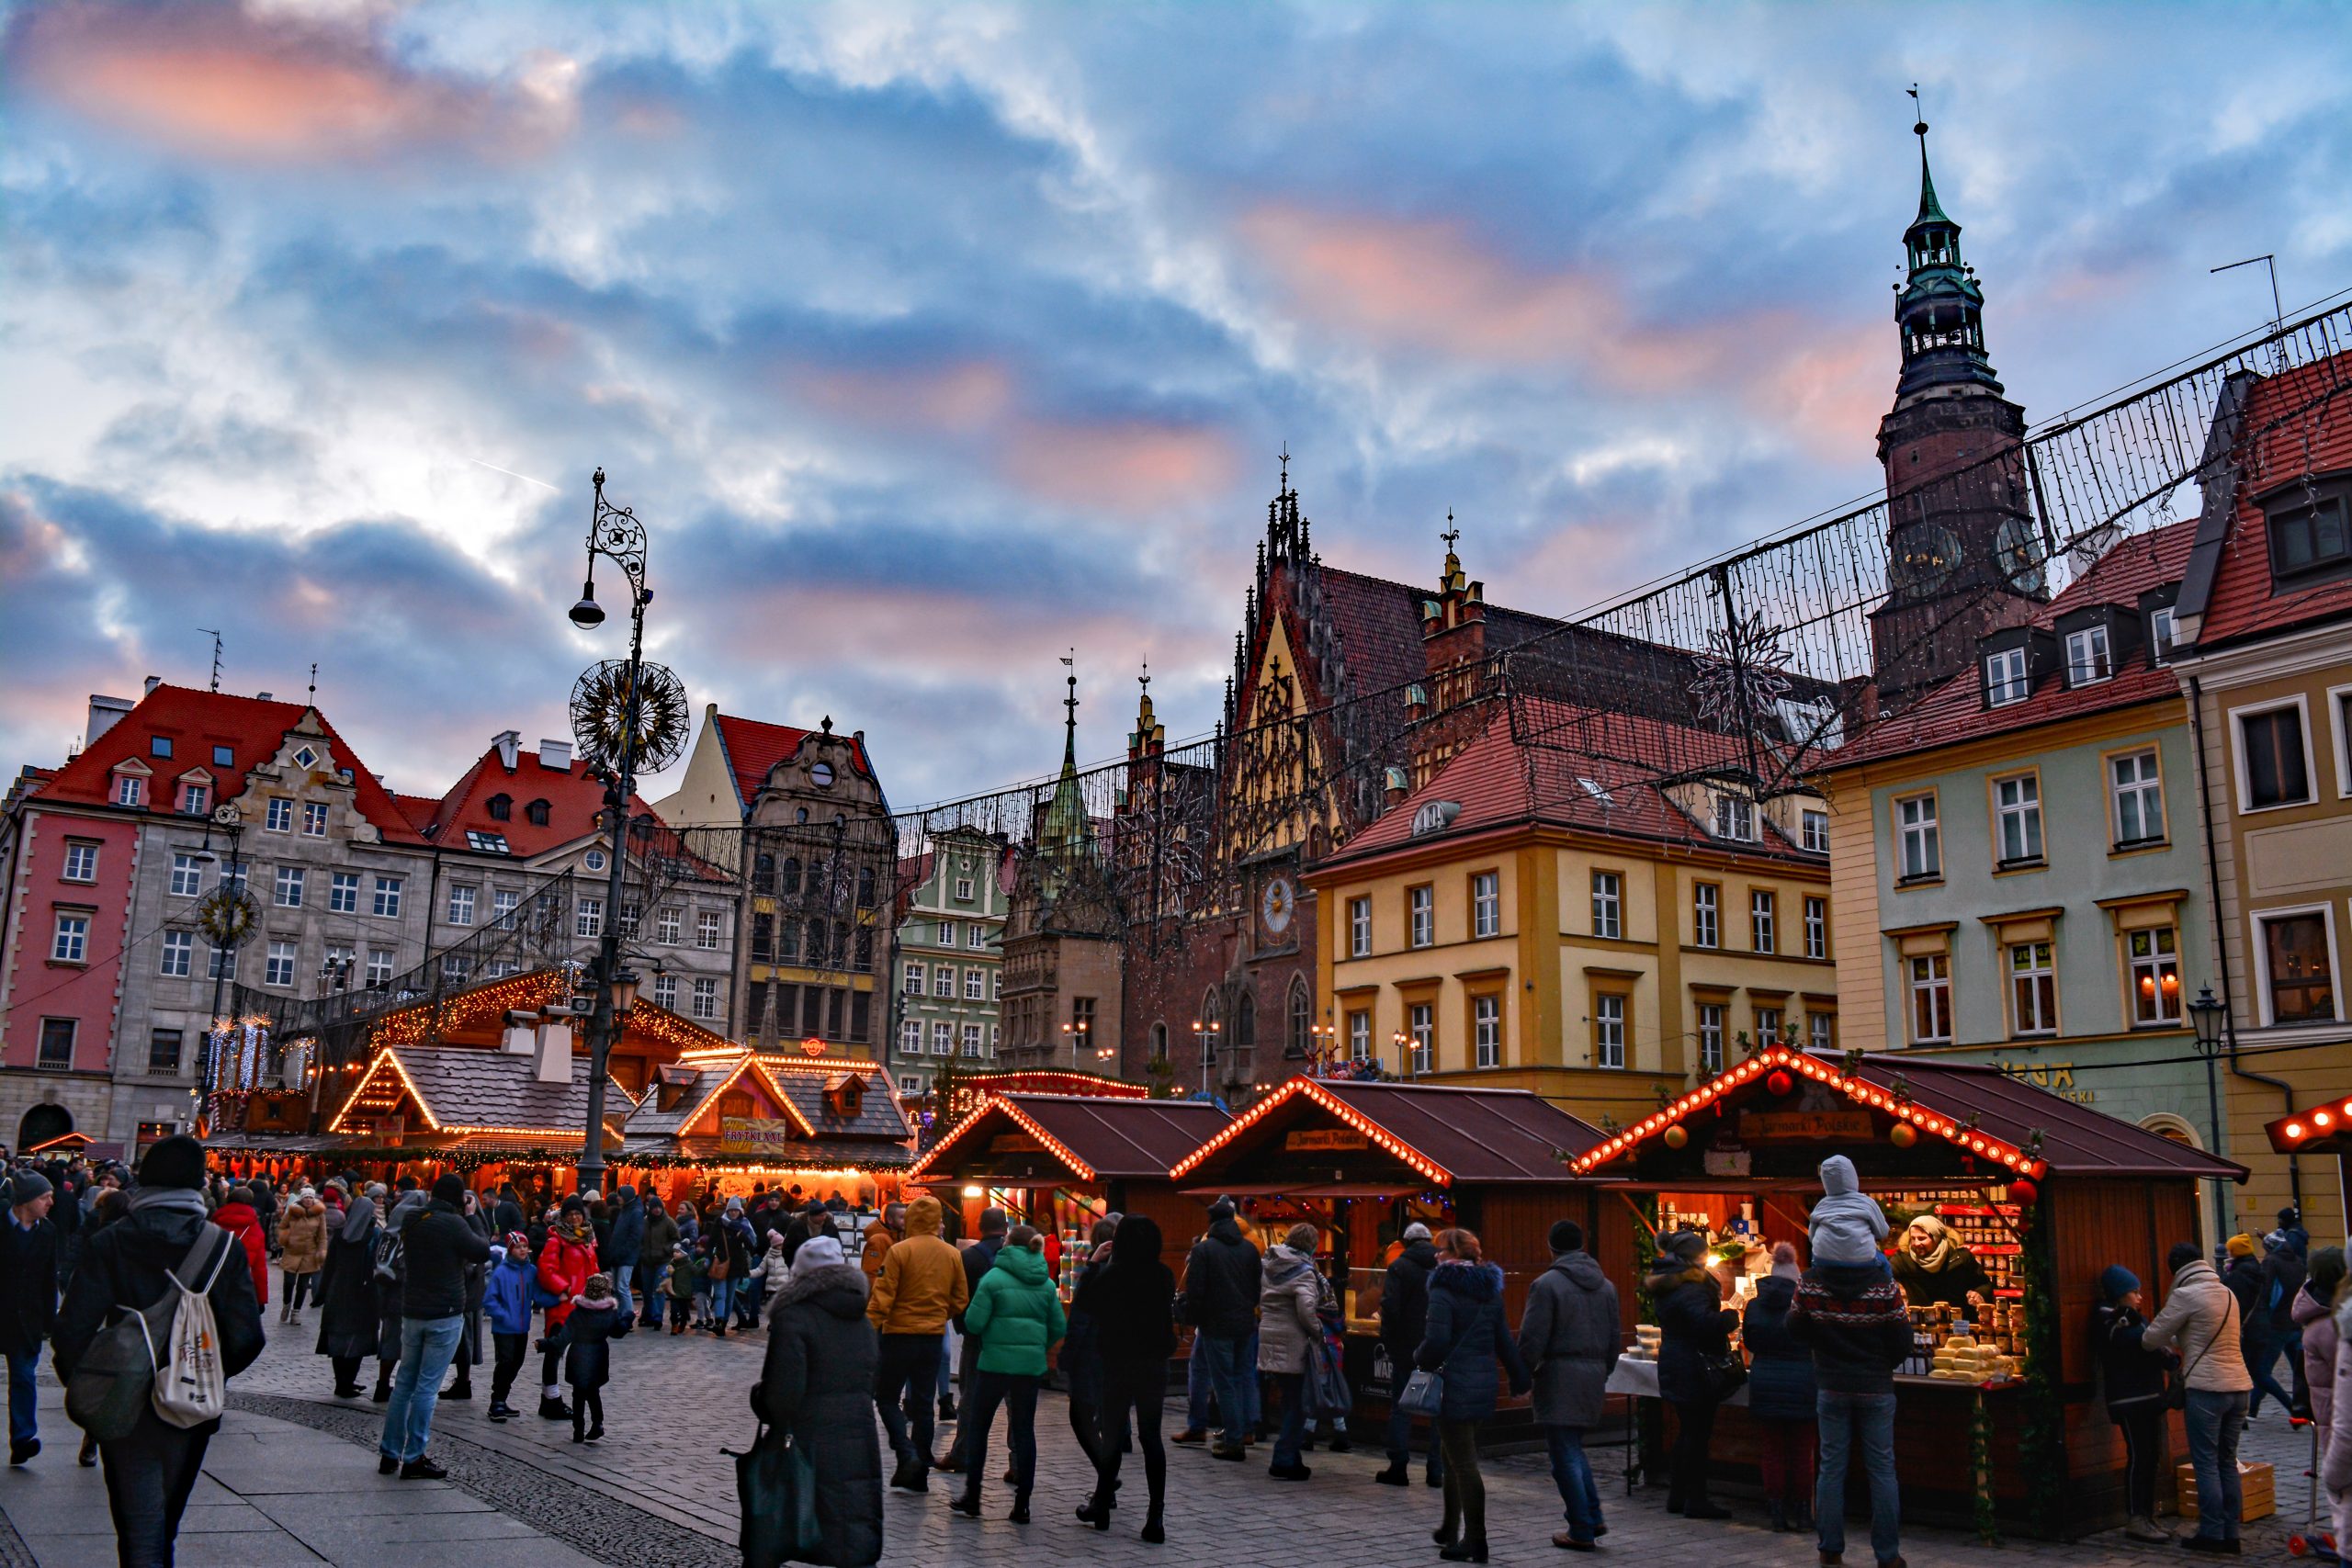 Wroclaw, Poland has one of the best European Christmas Markets